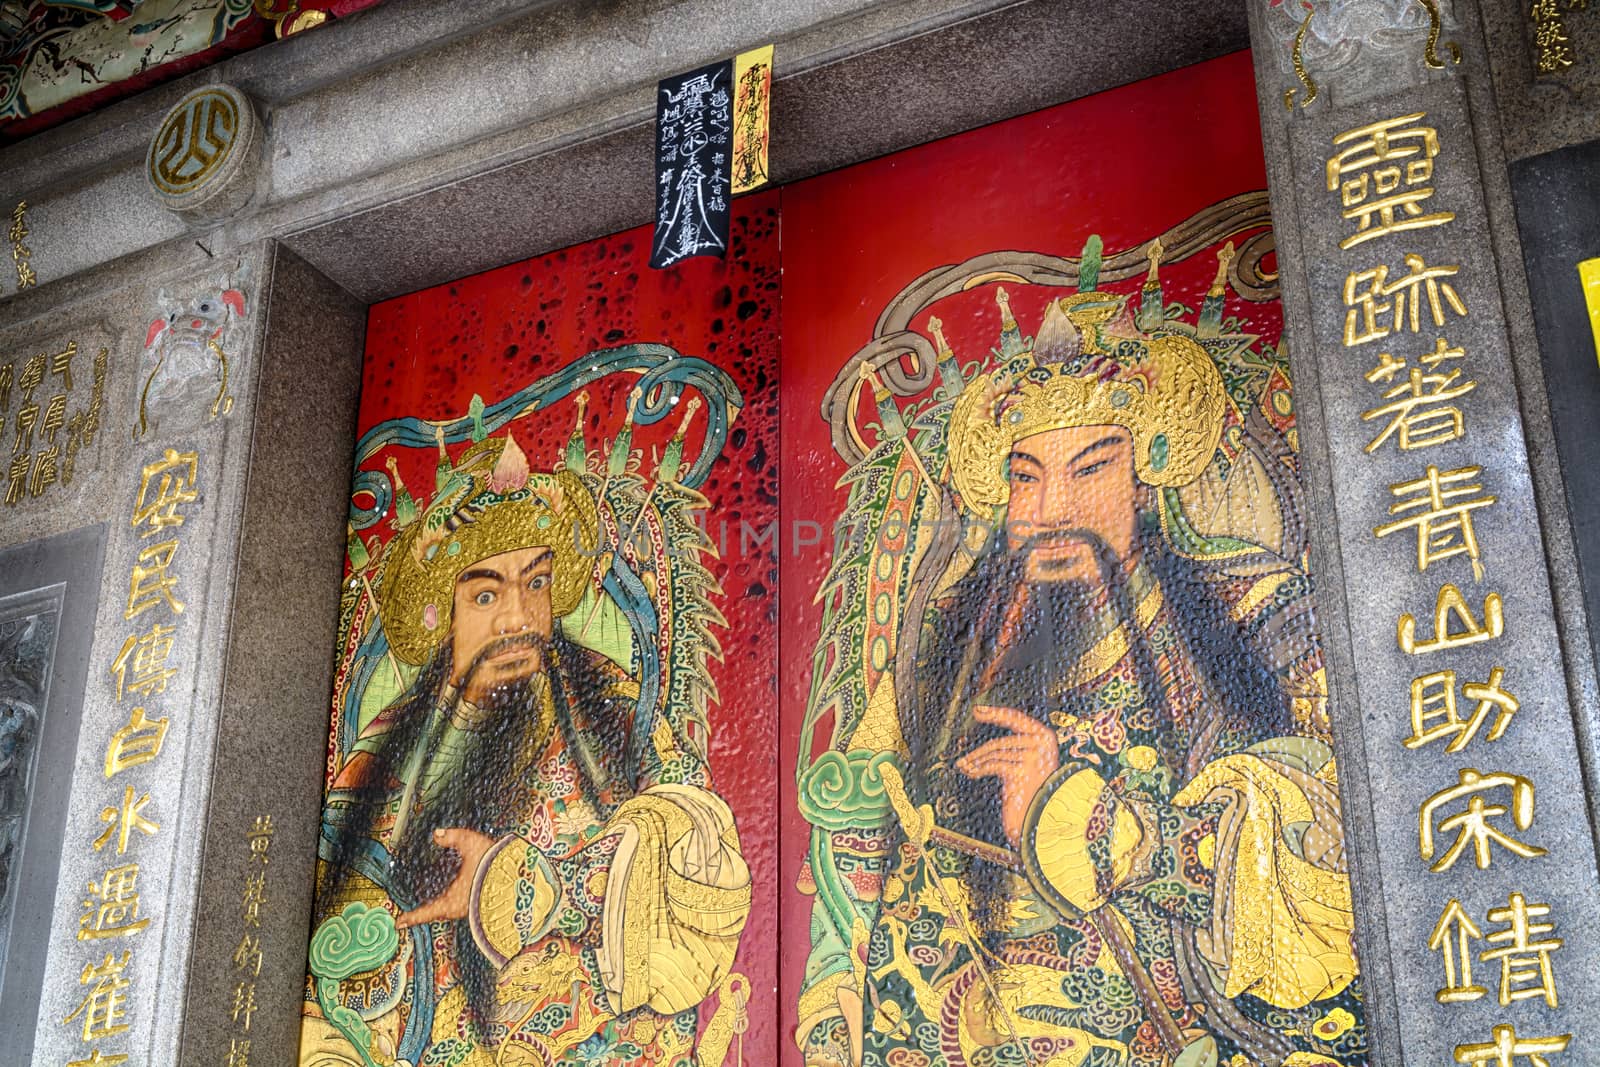 General Hsieh Pi-an and Fan Wu-ti, the two guardians painted on the front door of the Qingshan Temple.